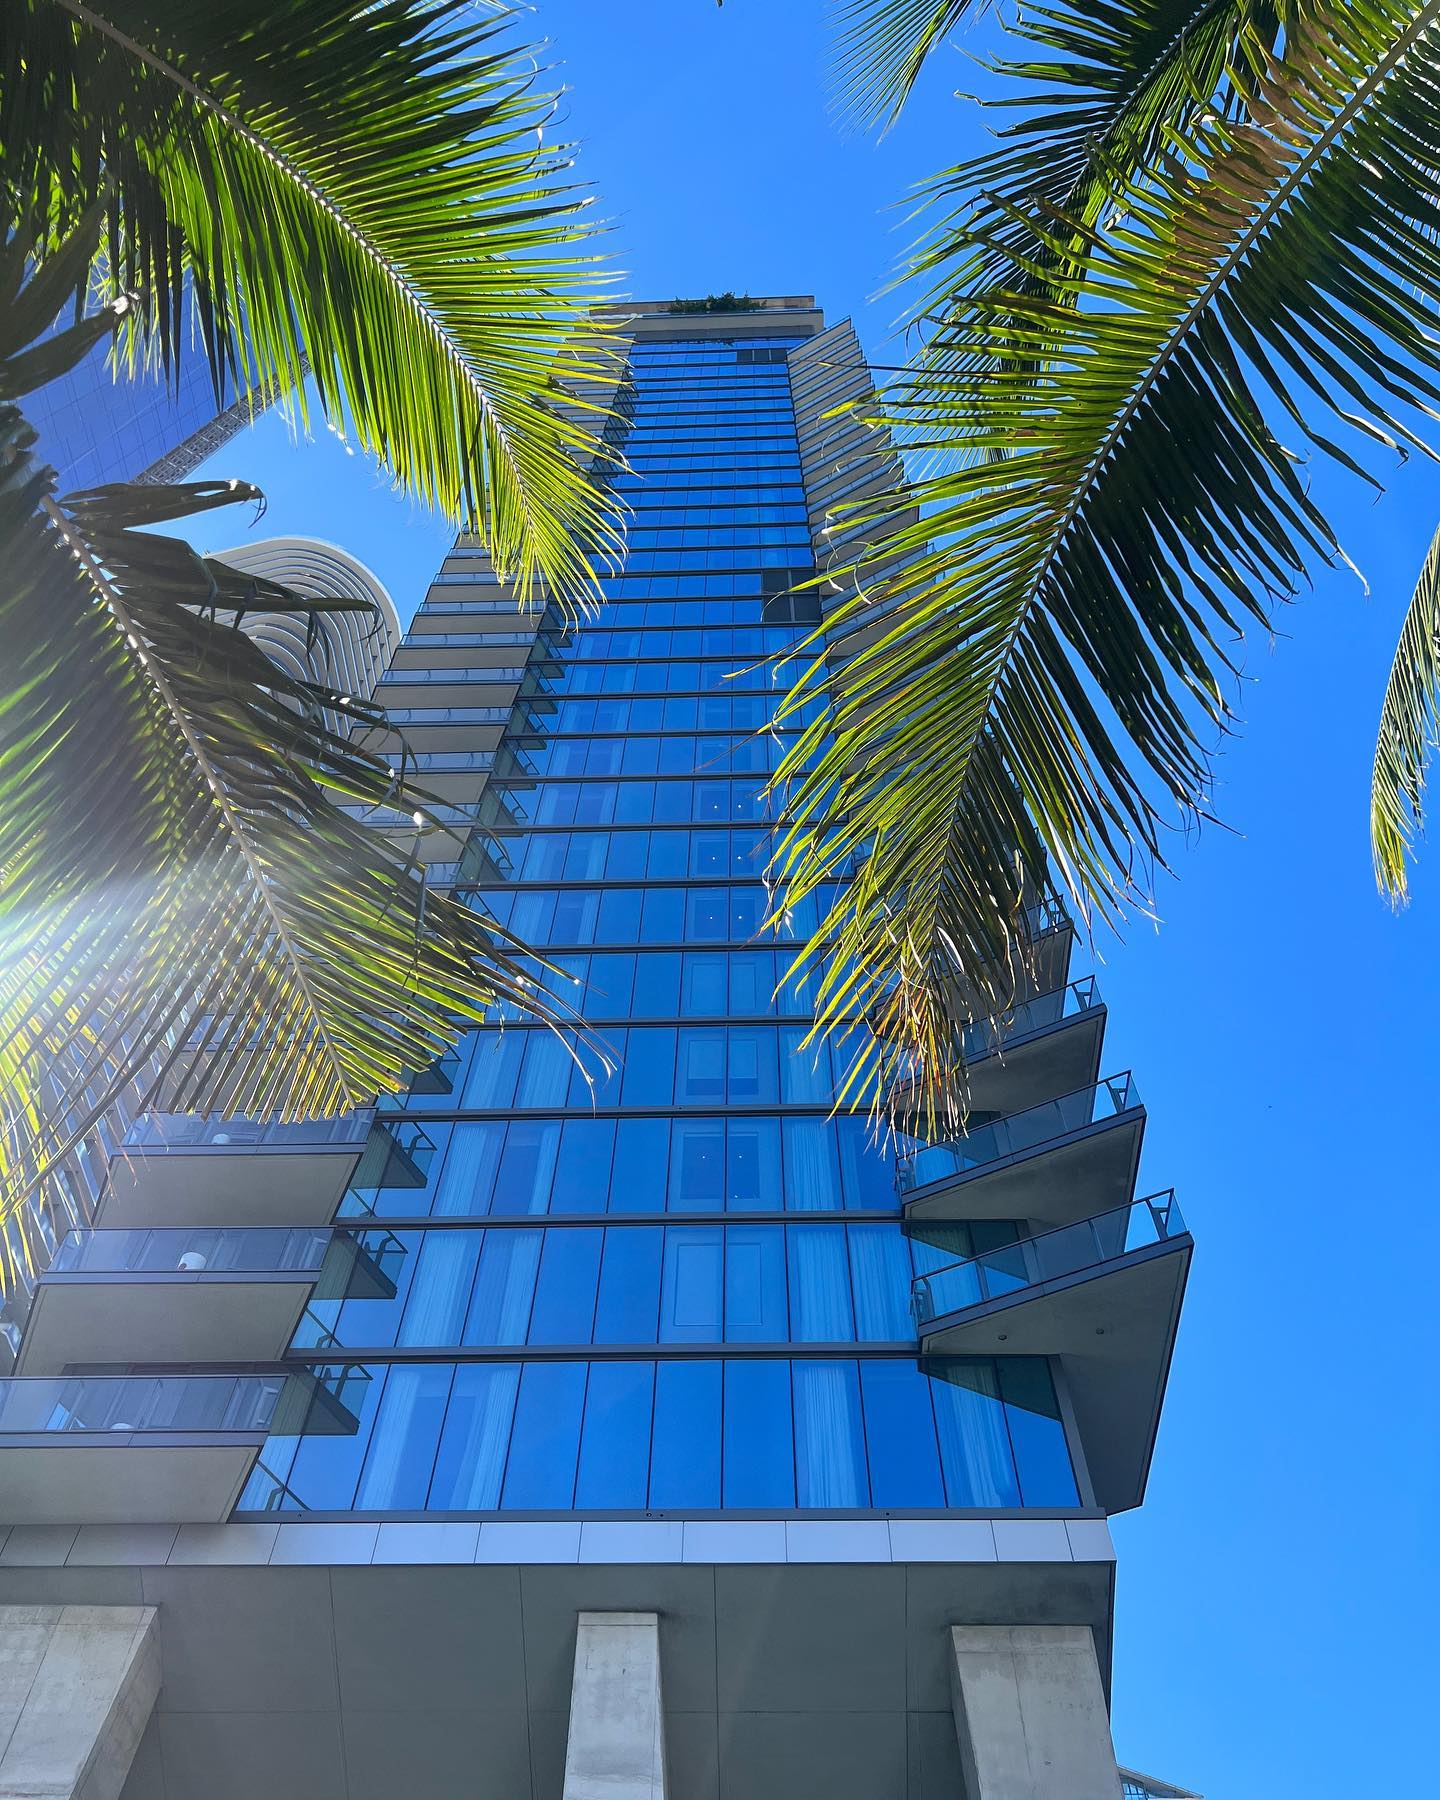 Soaring high with Miami vibes #atEAST